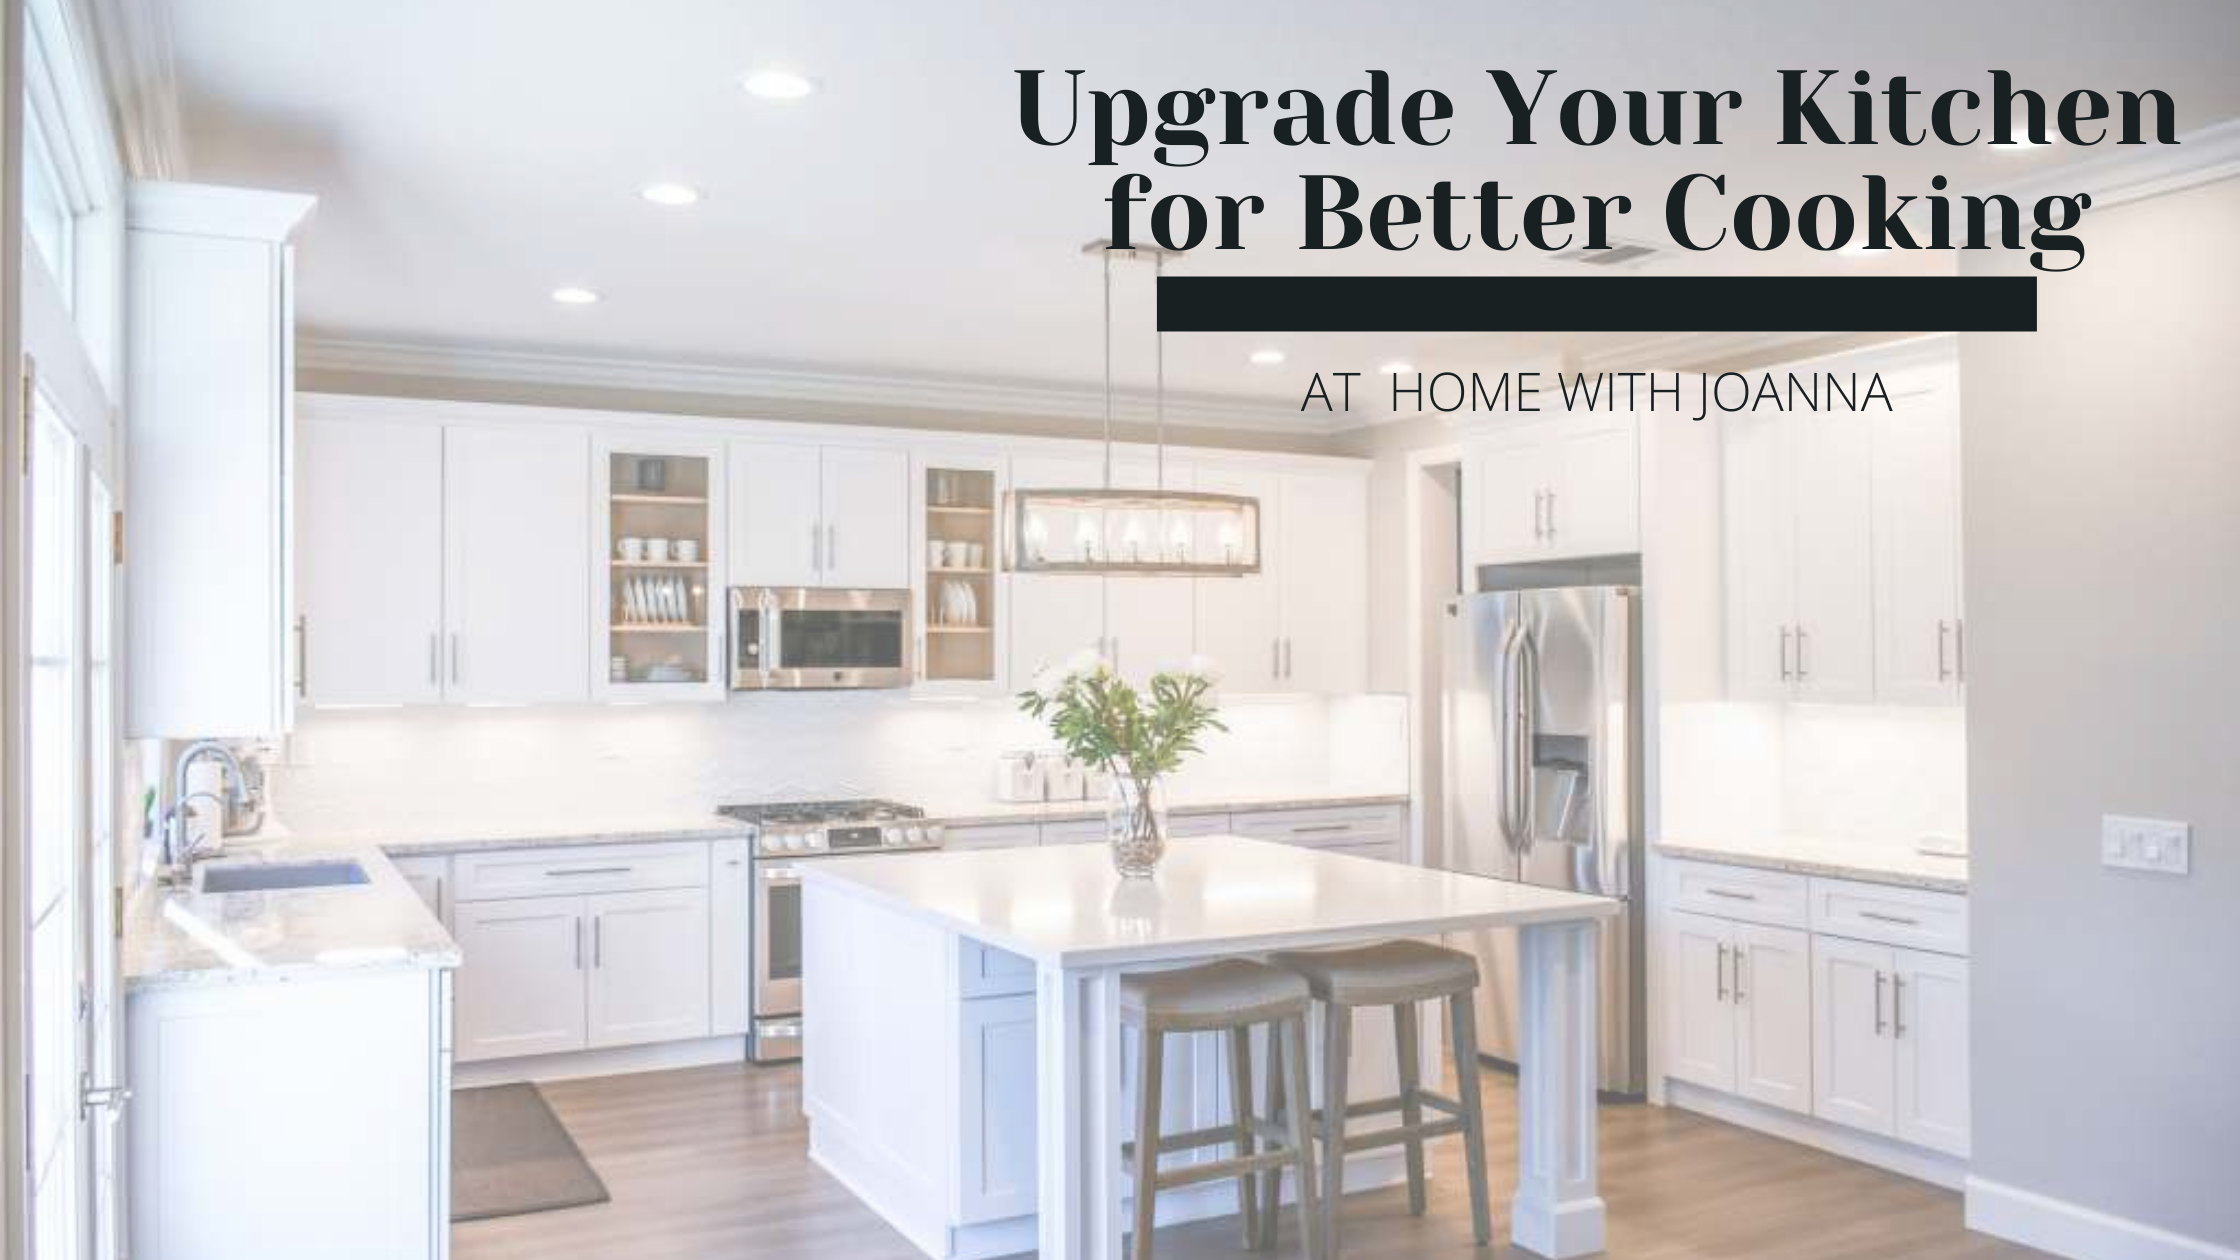 Upgrade Your Kitchen for Better Cooking – At Home With Joanna